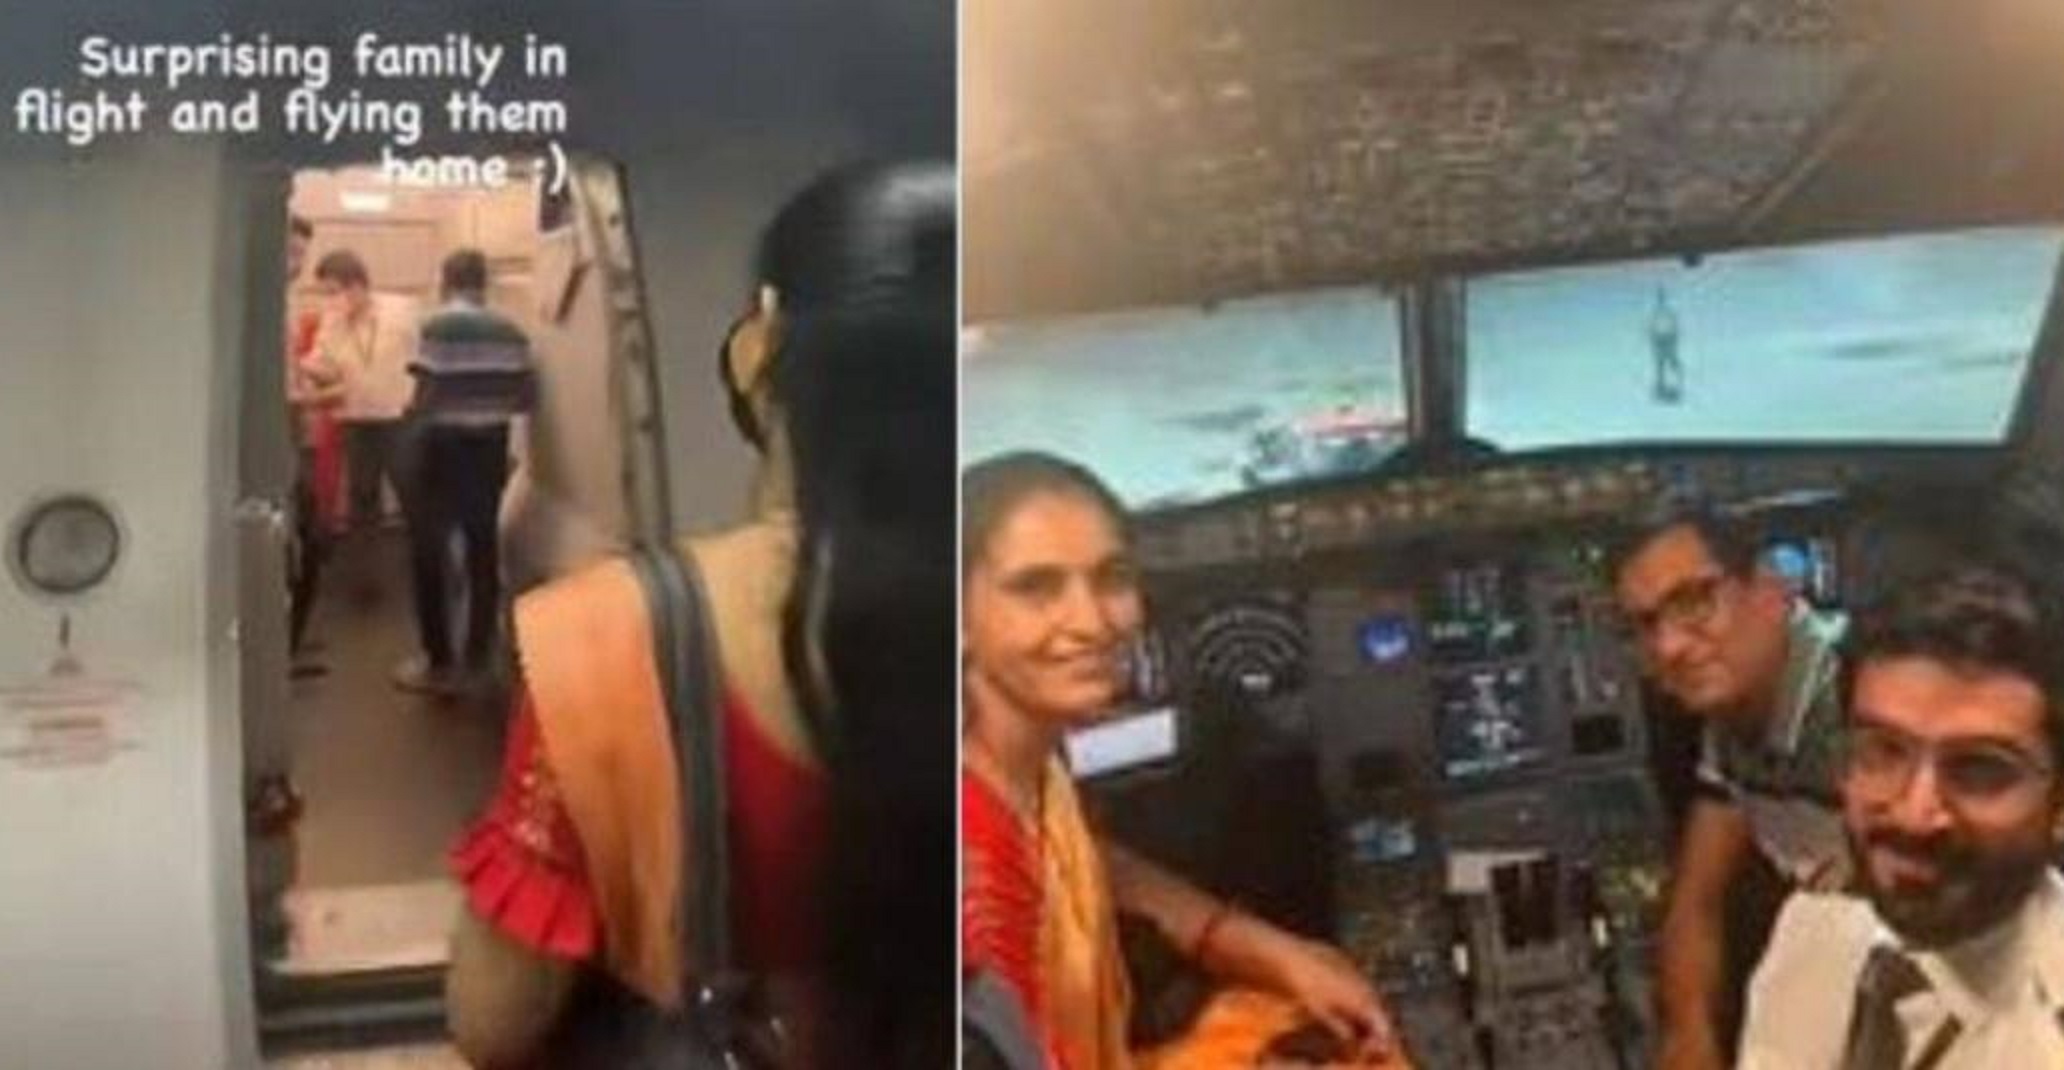 Heartwarming: Son Surprises Parents In Viral Video, Reveals Himself As The Pilot Of Their Flight